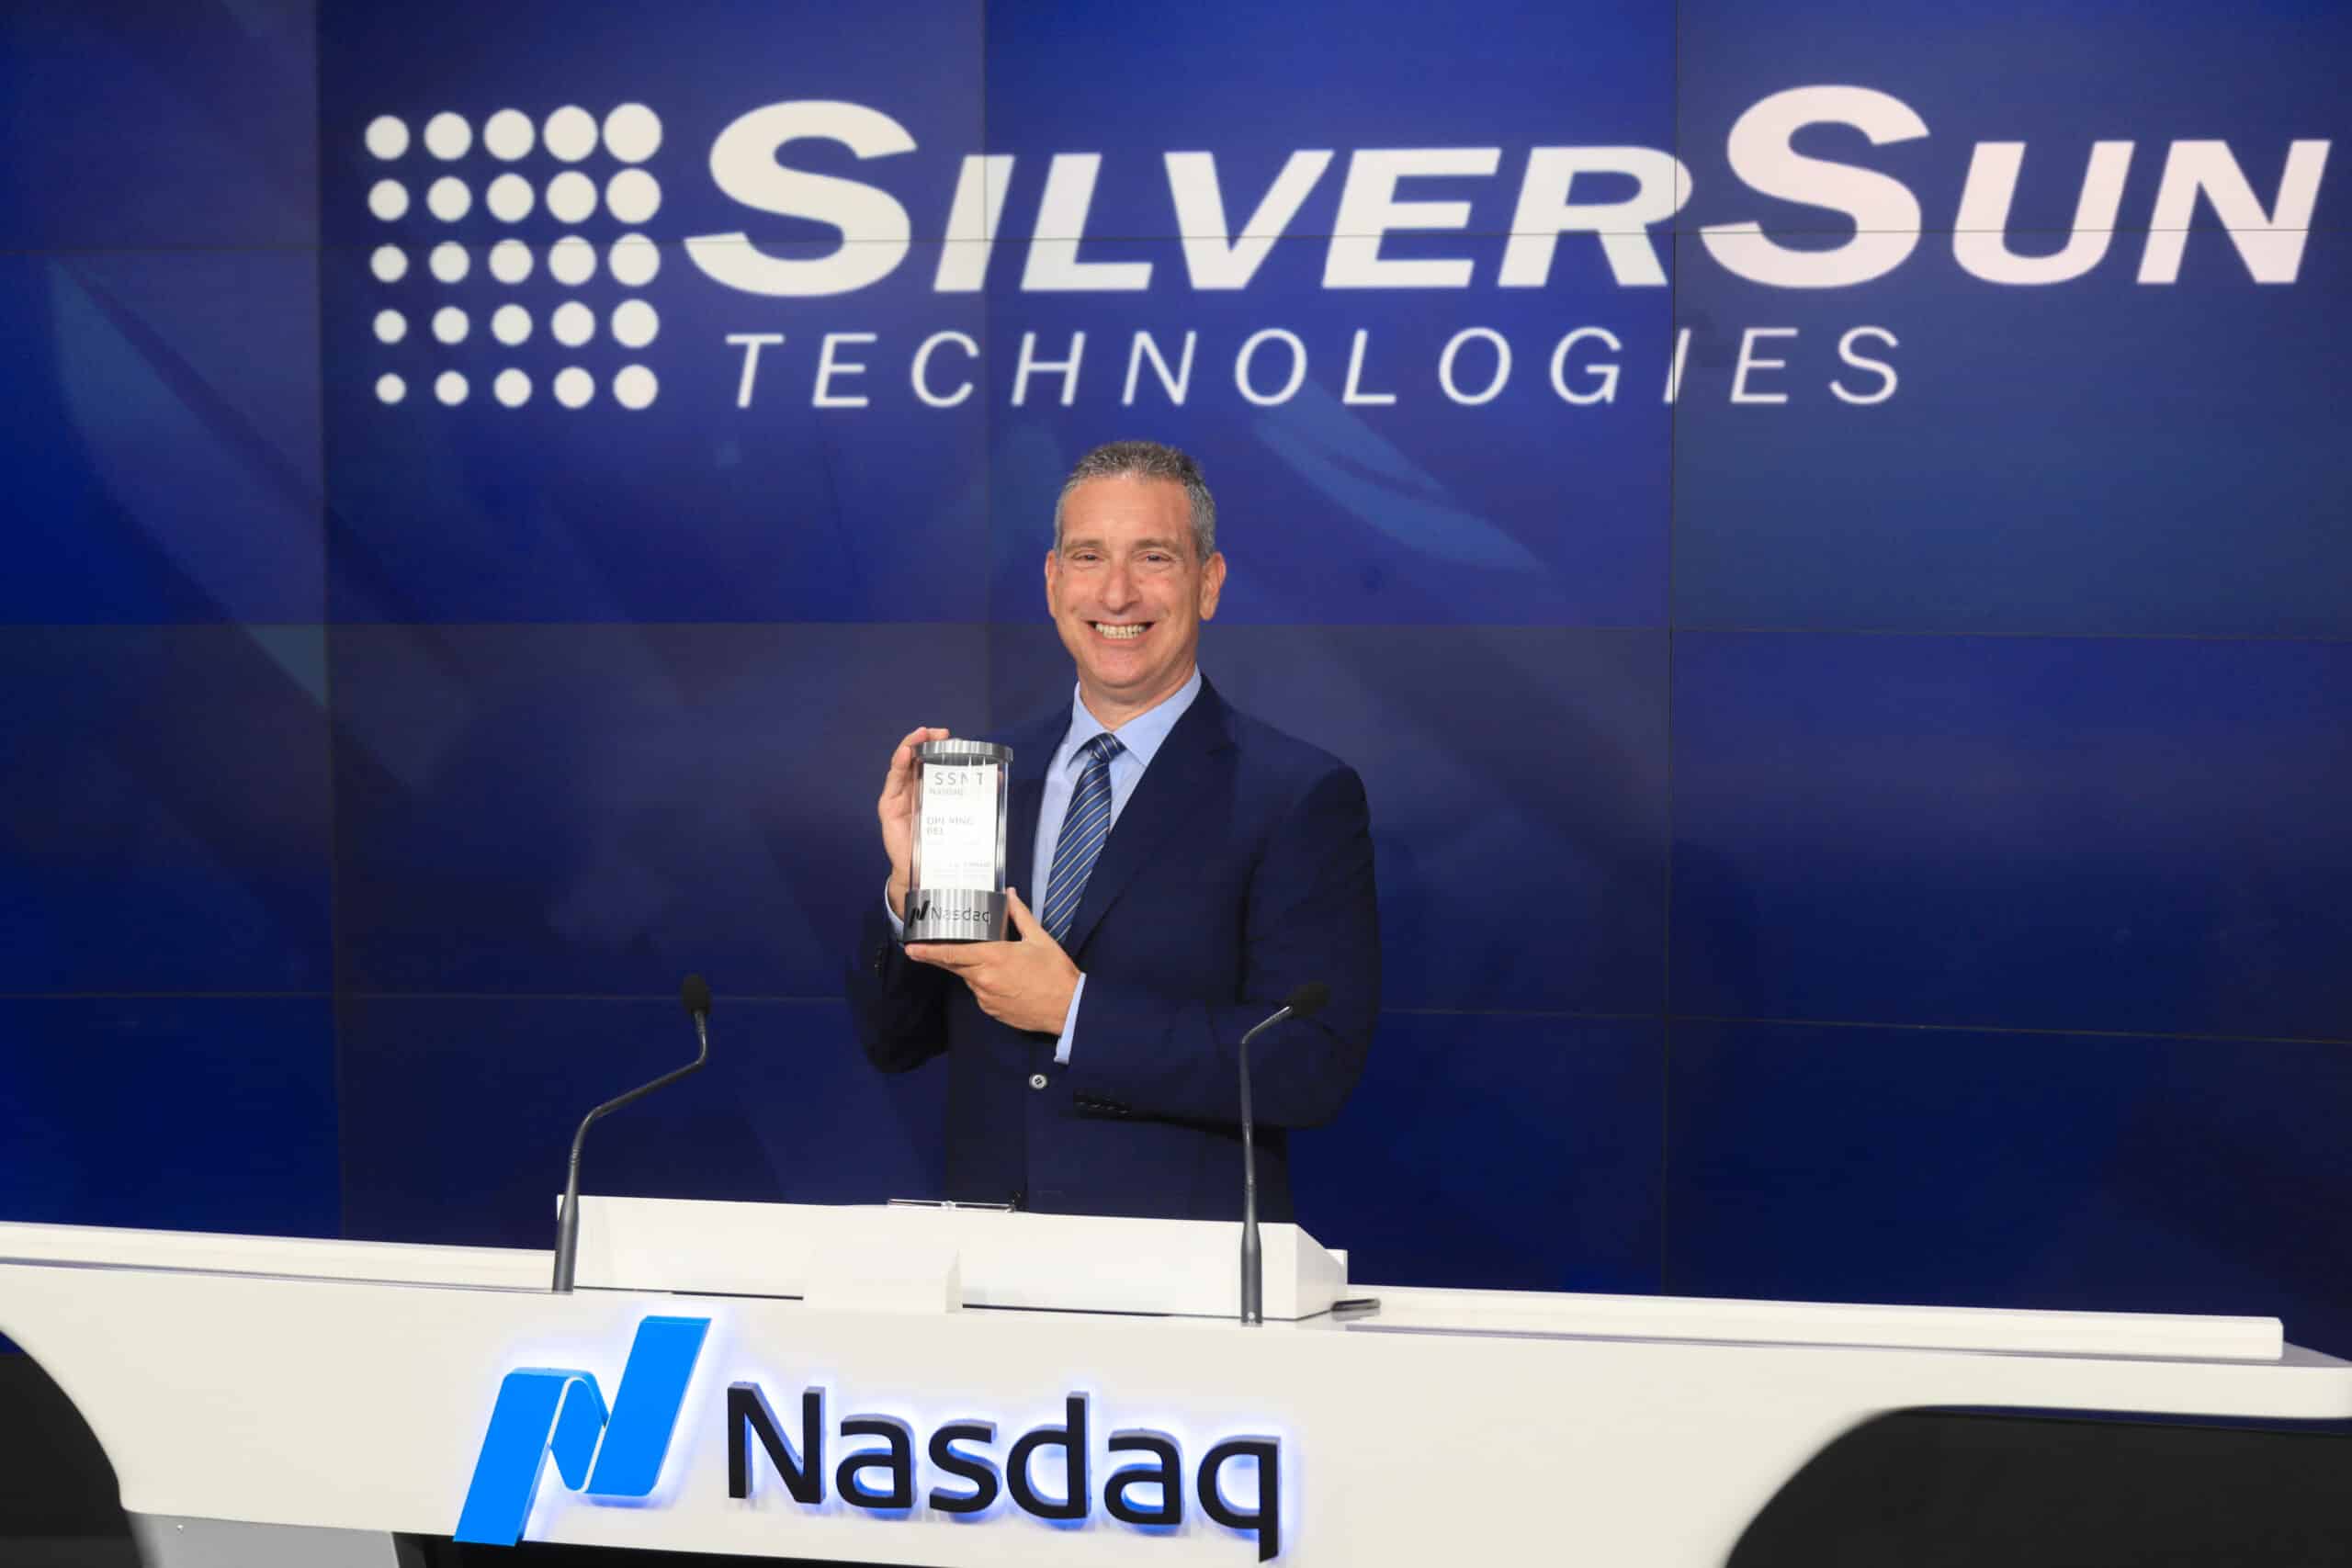 SWK Technologies, Inc. recently announced that Mark Meller, CEO of its parent company, SilverSun Technologies, Inc., was given the honor of ringing the Opening Bell at the NASDAQ MarketSite at Times Square, New York, on August 15, 2018